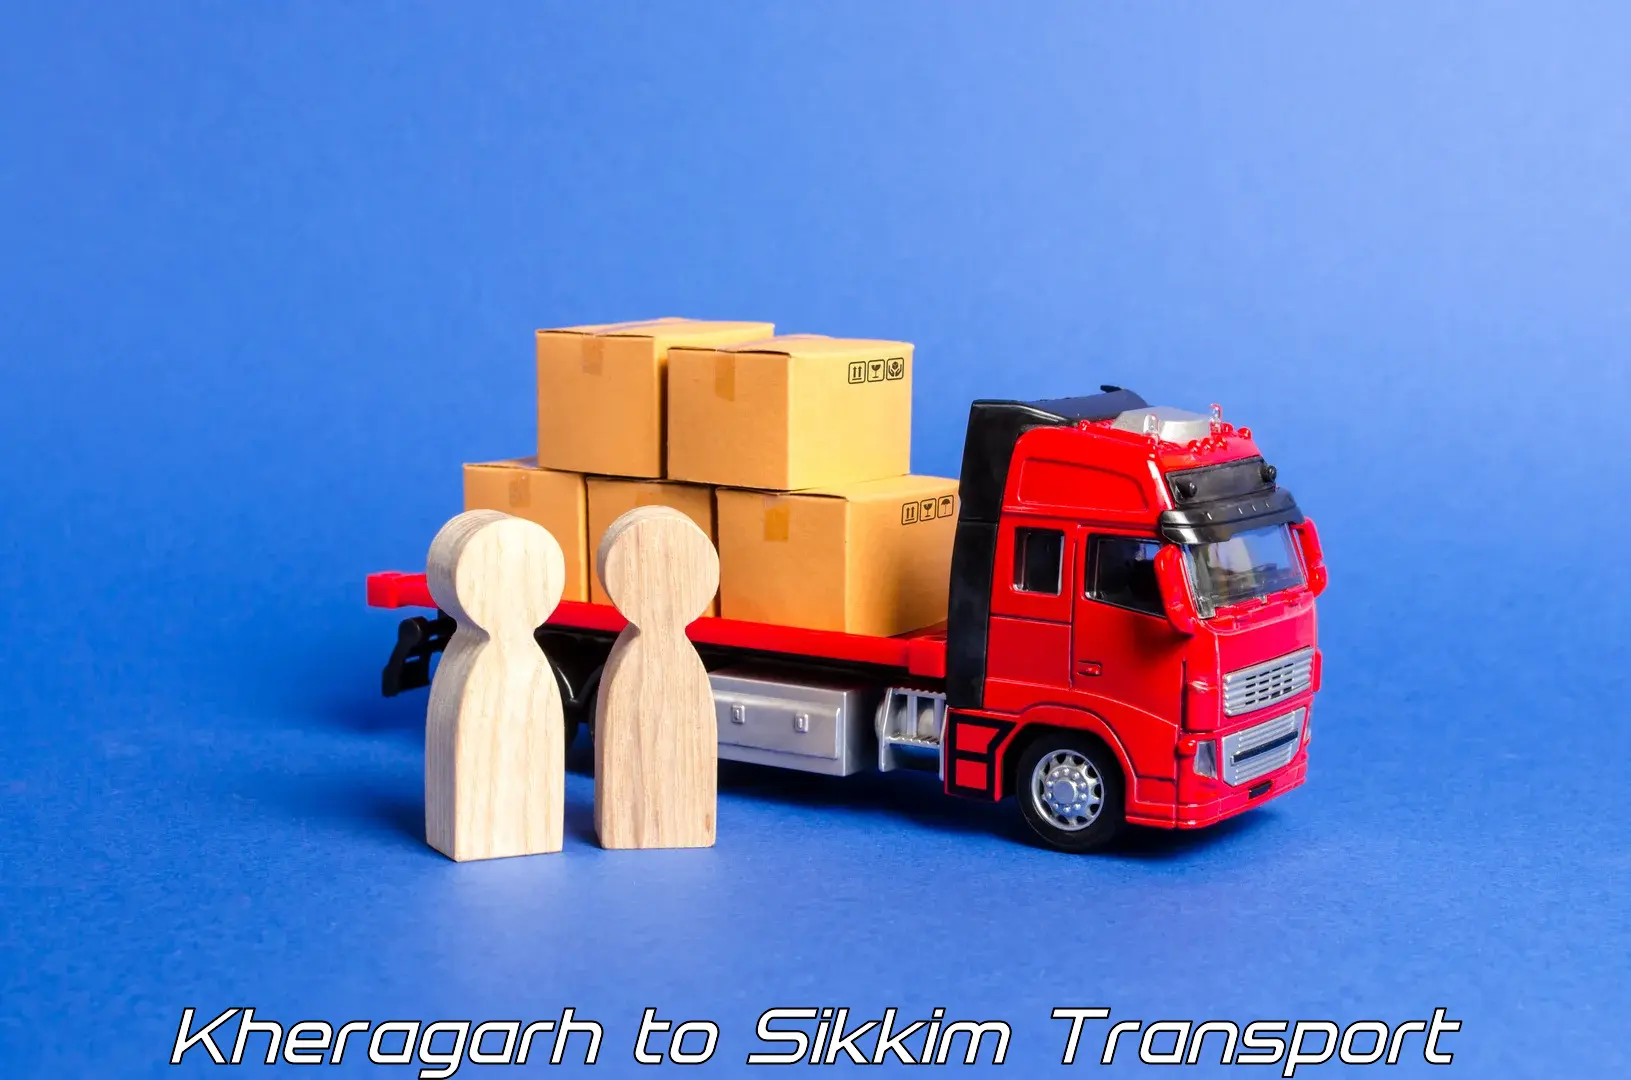 Delivery service Kheragarh to East Sikkim